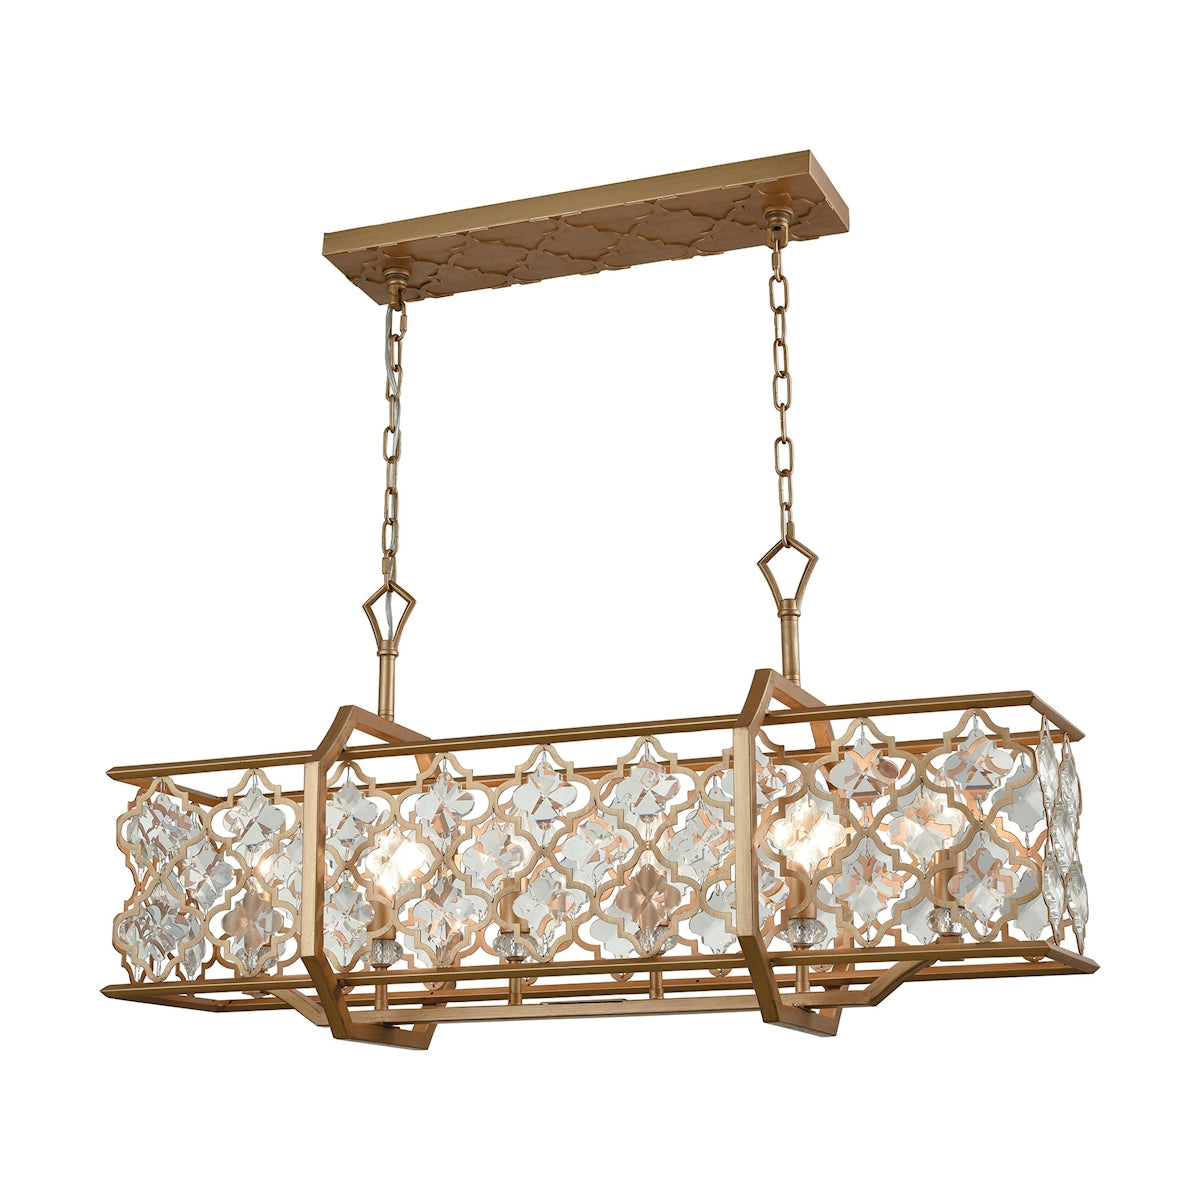 ELK Lighting 32095/6 - Armand 35" Wide 6-Light Chandelier with Clear Crystals in Matte Gold